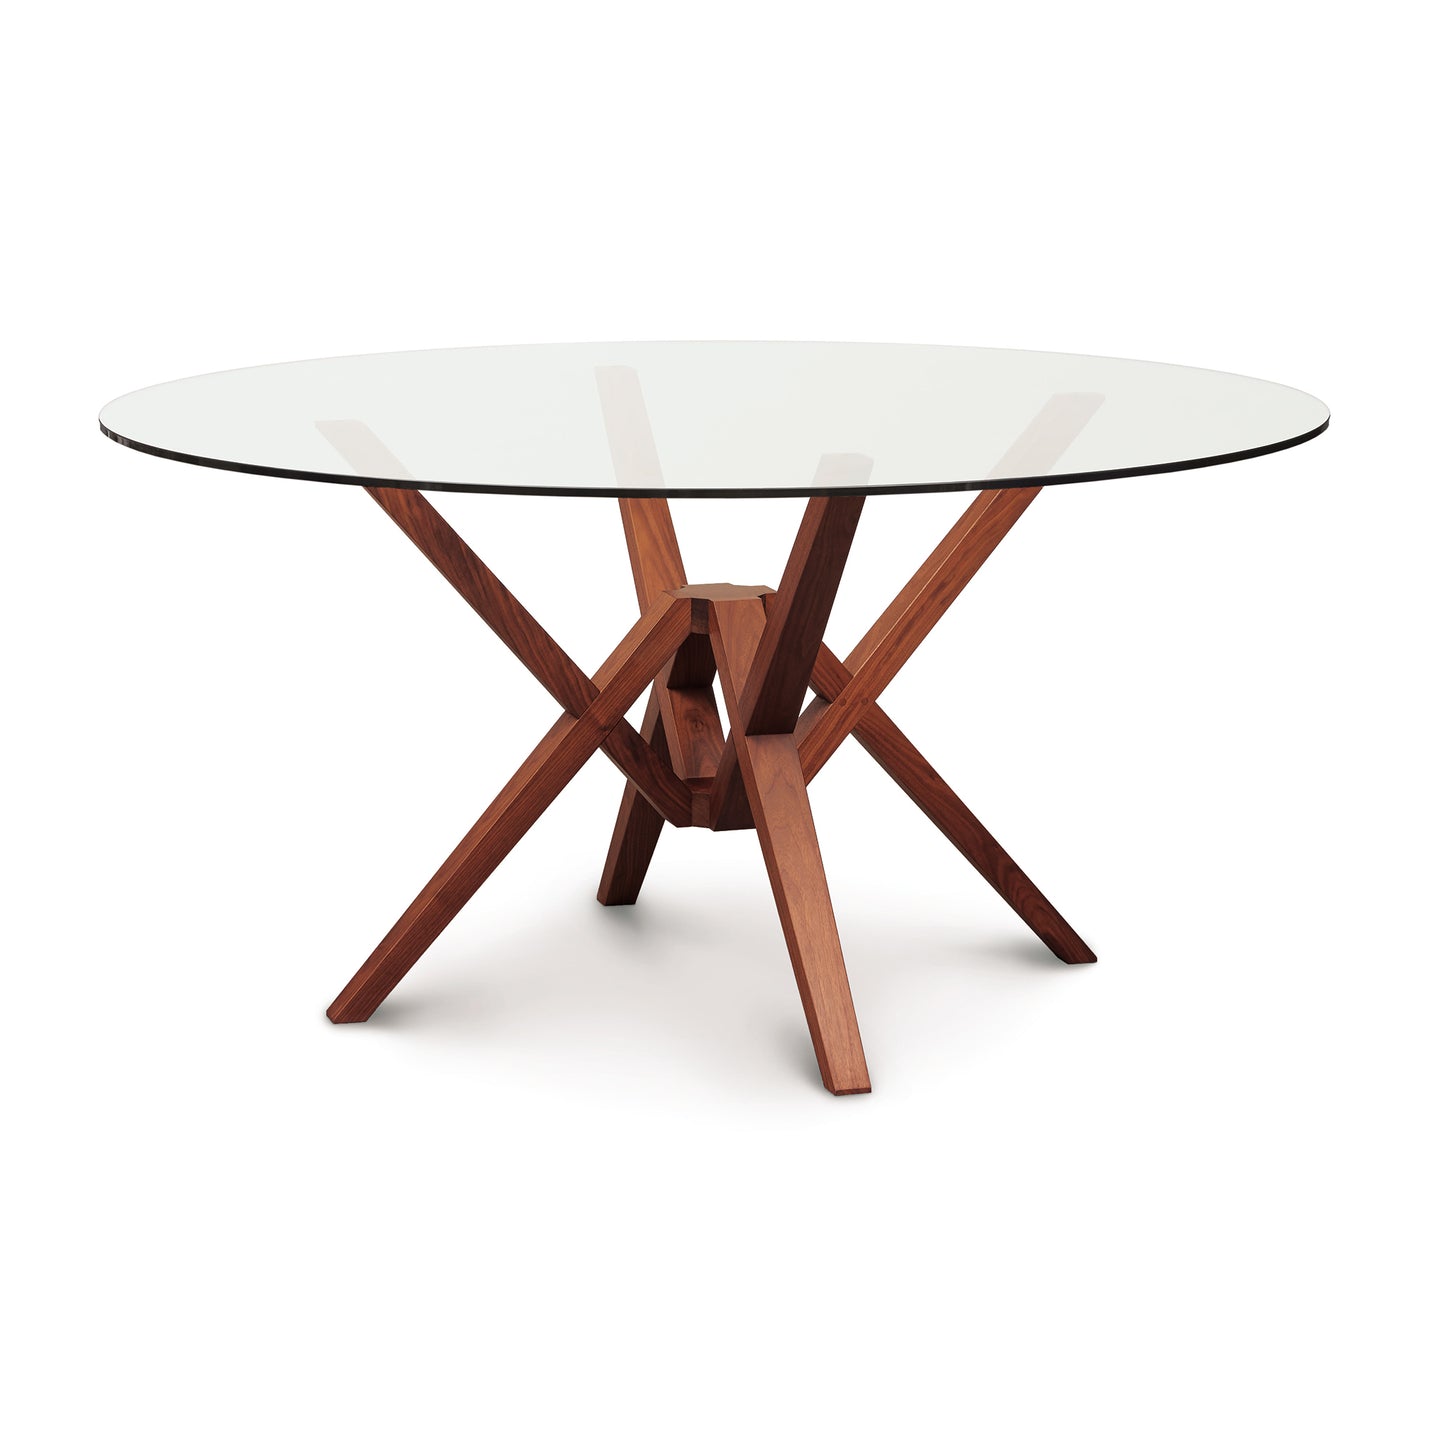 Copeland Furniture Exeter Round Glass Top Table with a solid wood base made from sustainably harvested hardwoods, isolated on a white background.